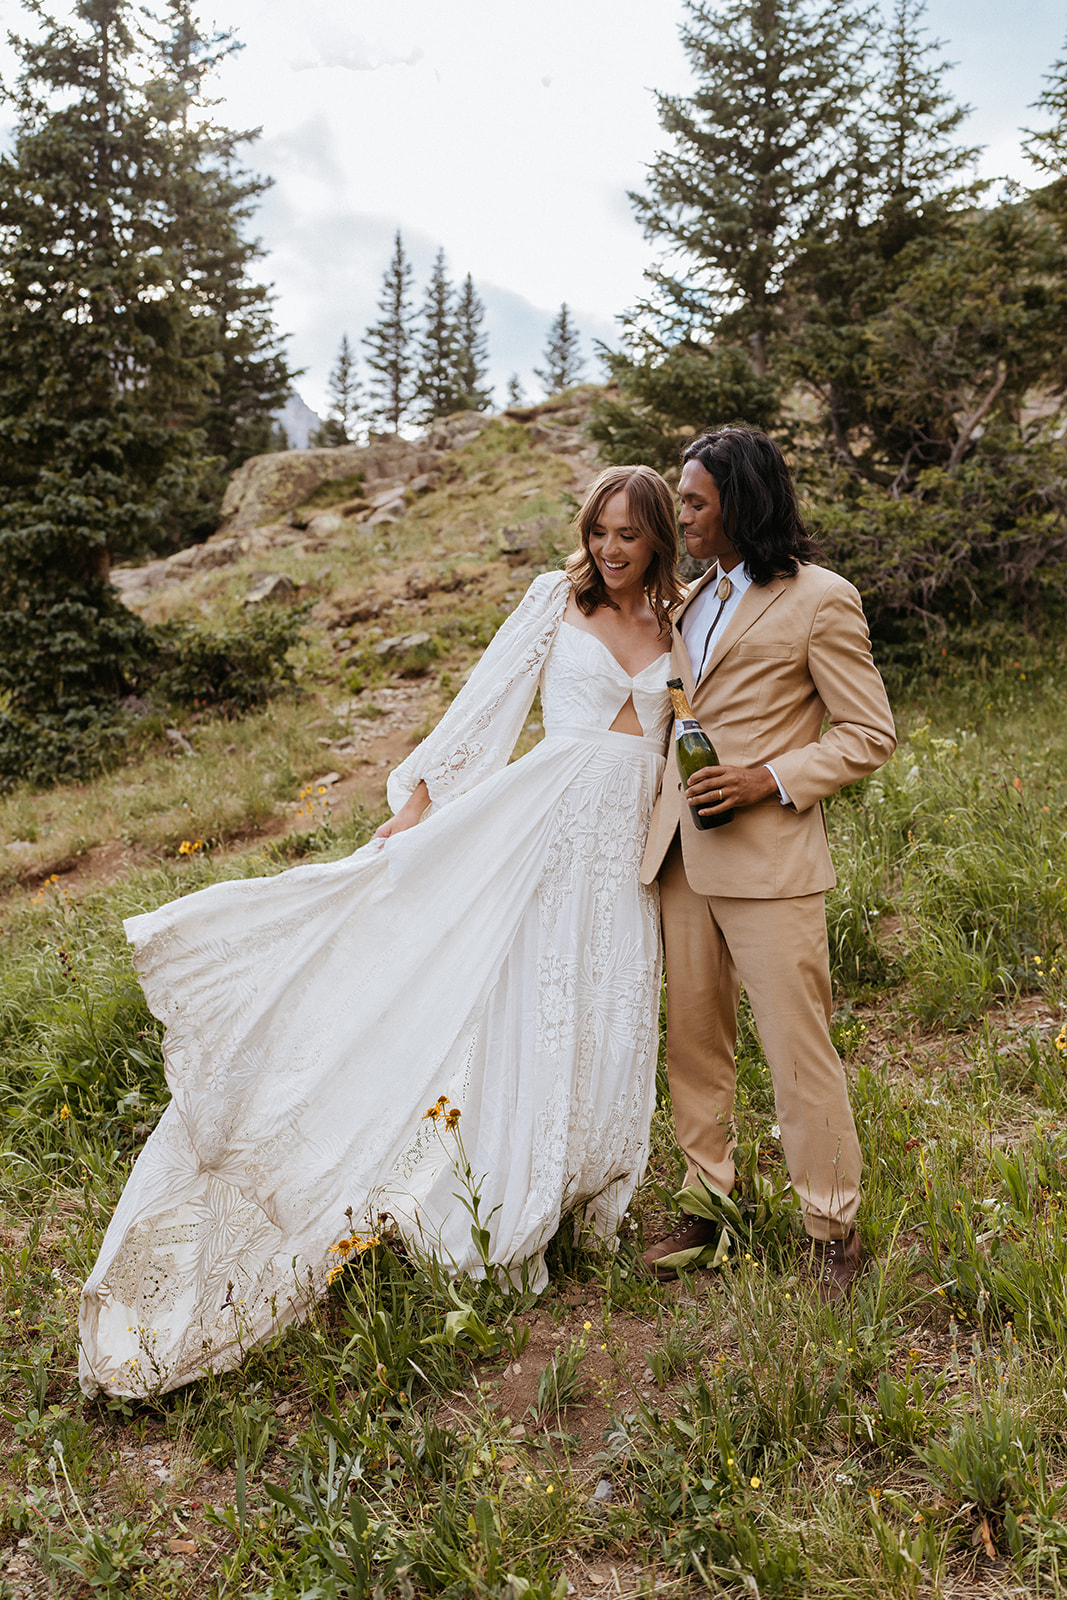 A bride's dress flows in the wind as she stands with her groom in a tan suit laughing